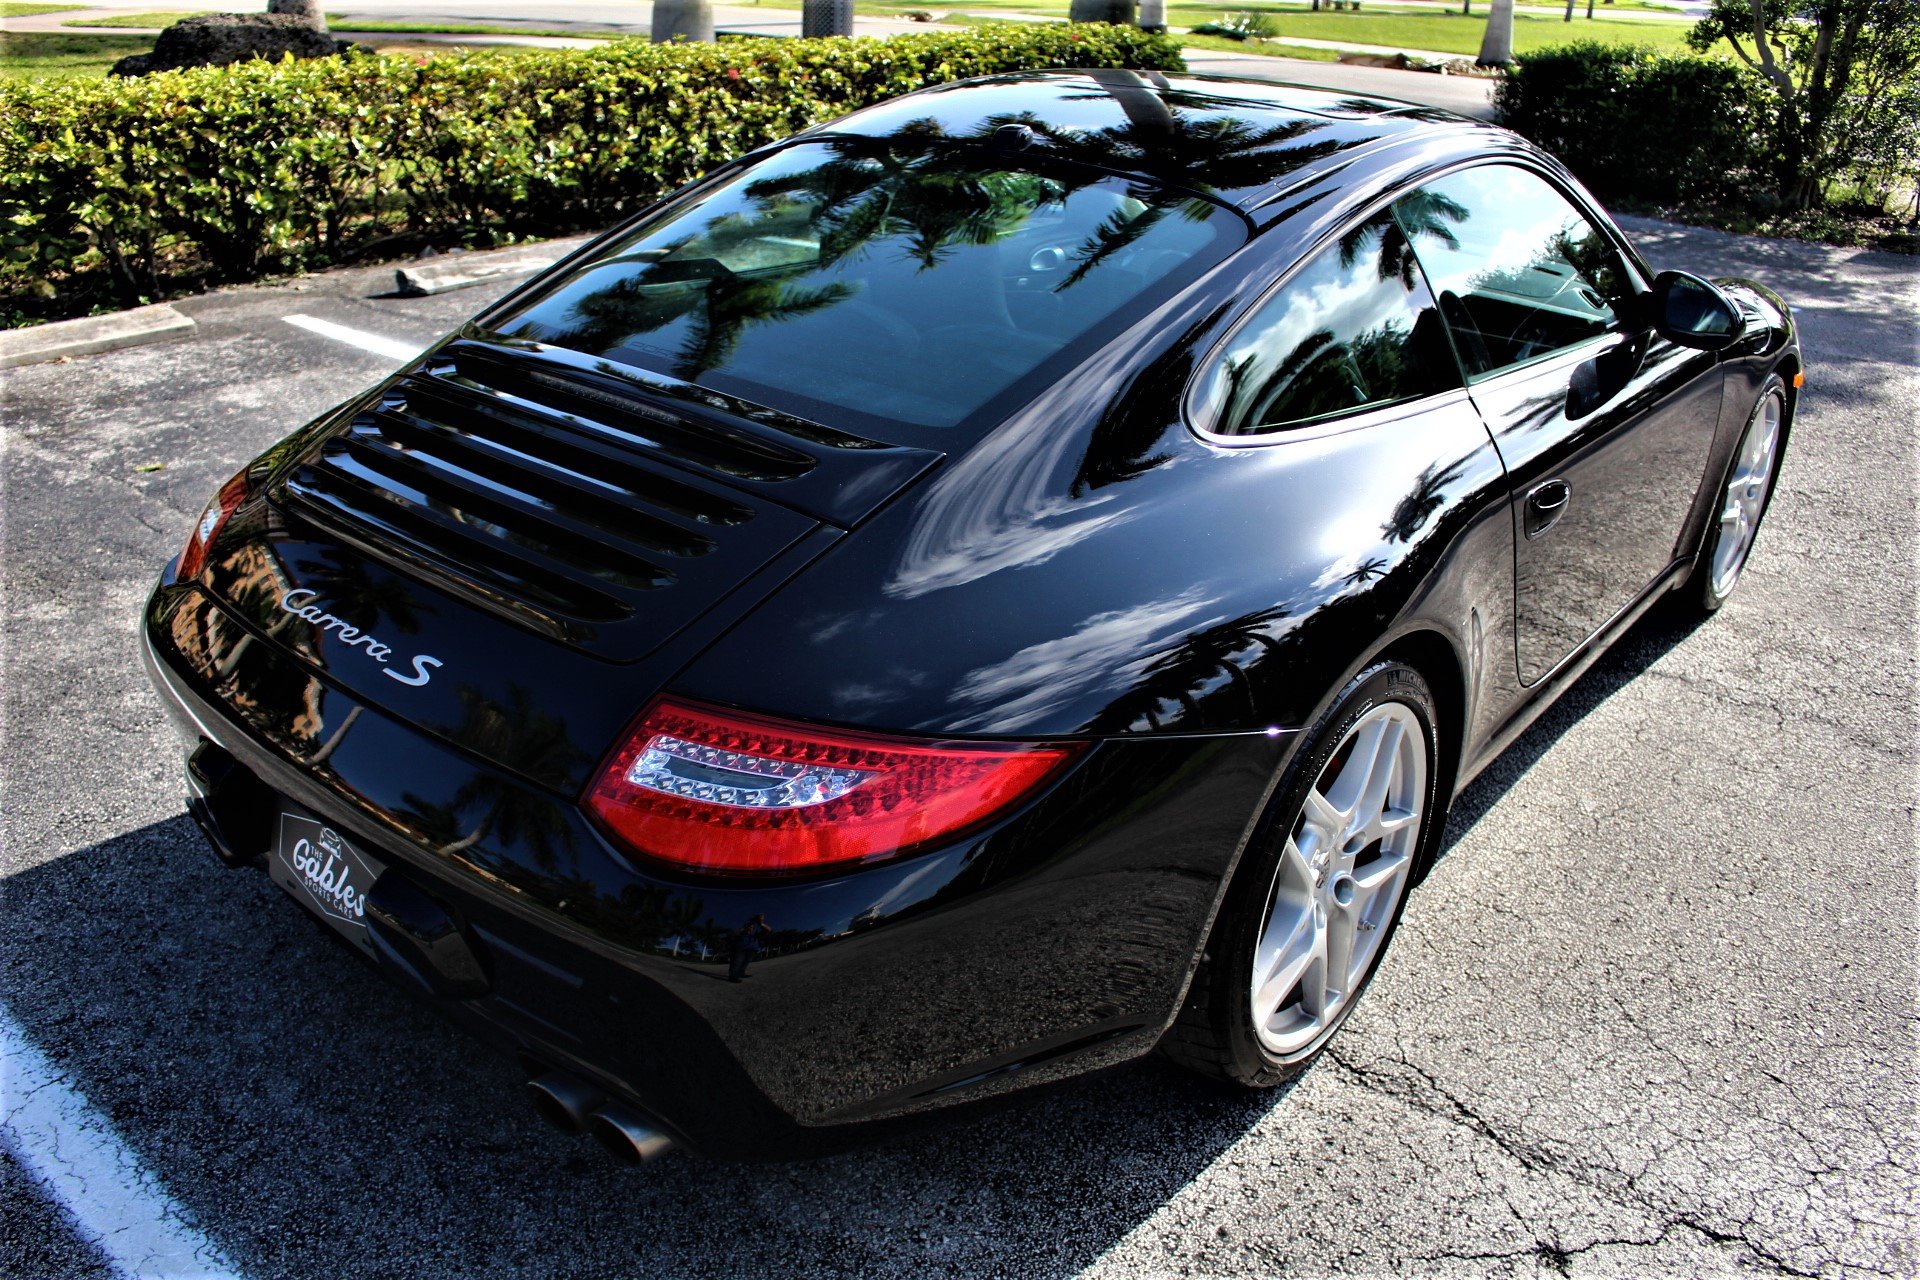 Used 2010 Porsche 911 Carrera S for sale Sold at The Gables Sports Cars in Miami FL 33146 1